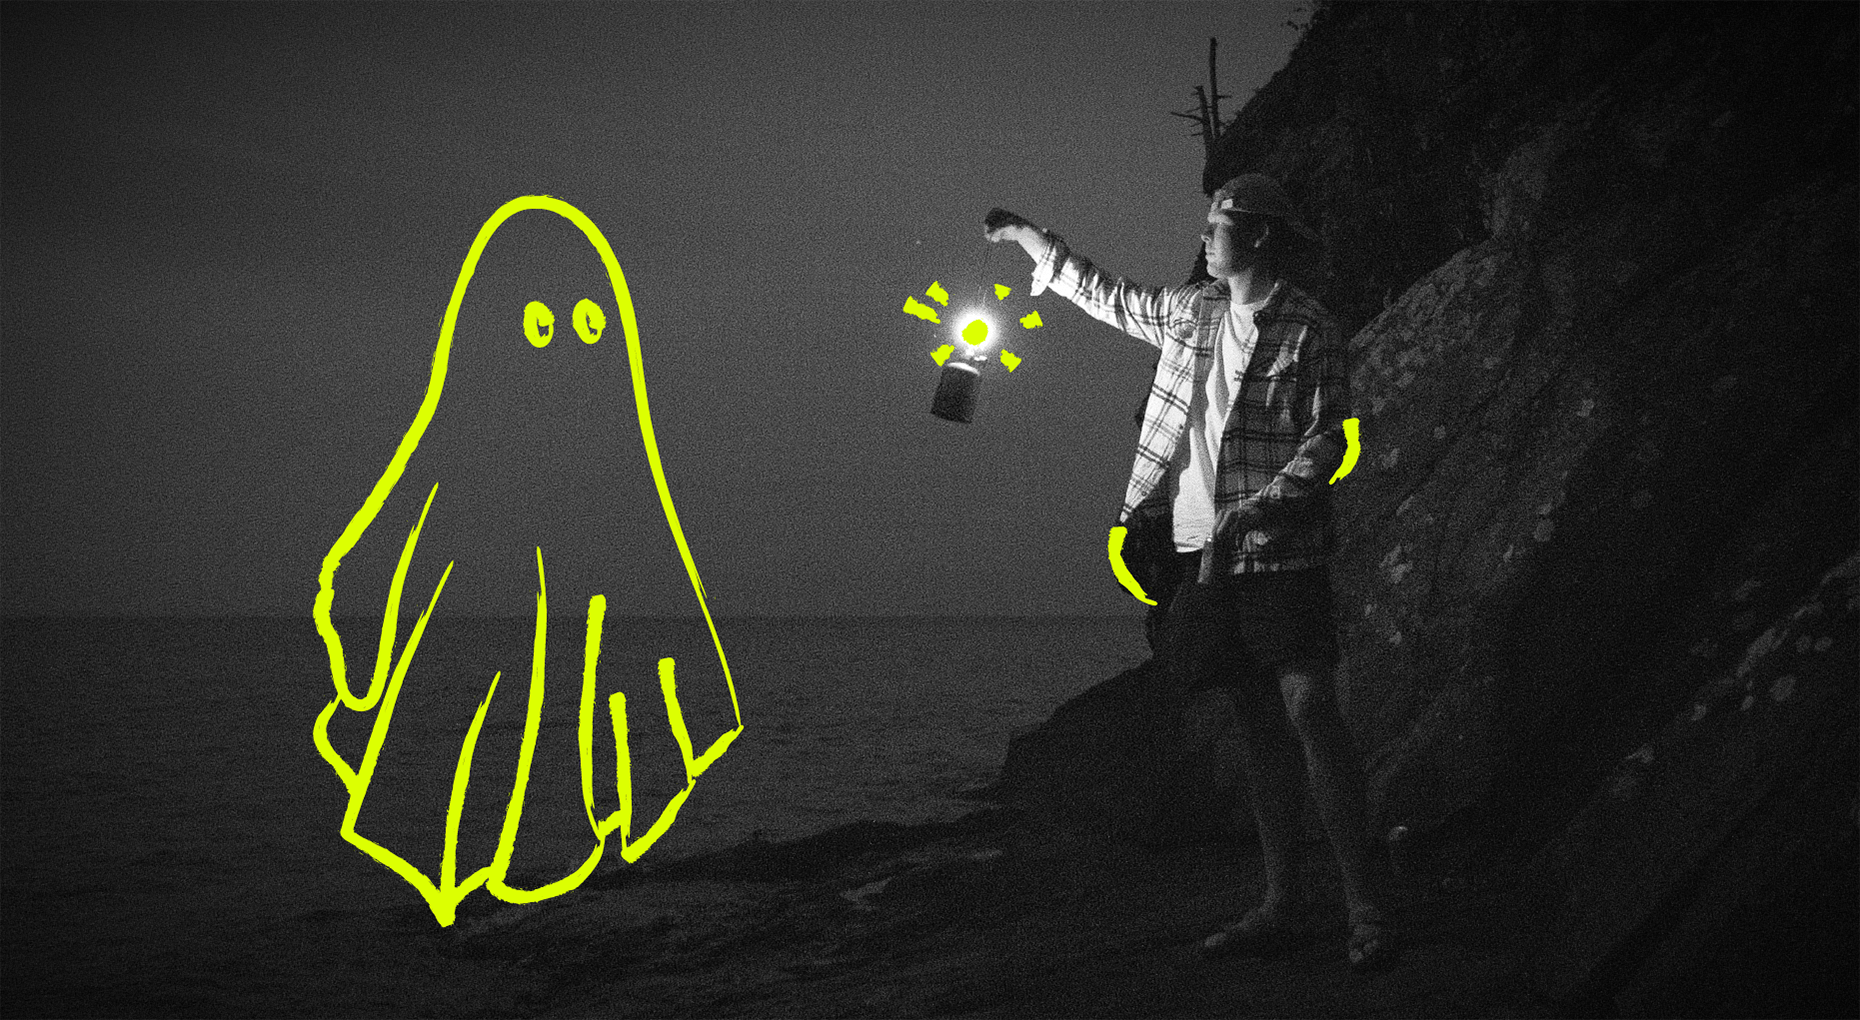 Client ghosts: how to deal with ghosting customers?